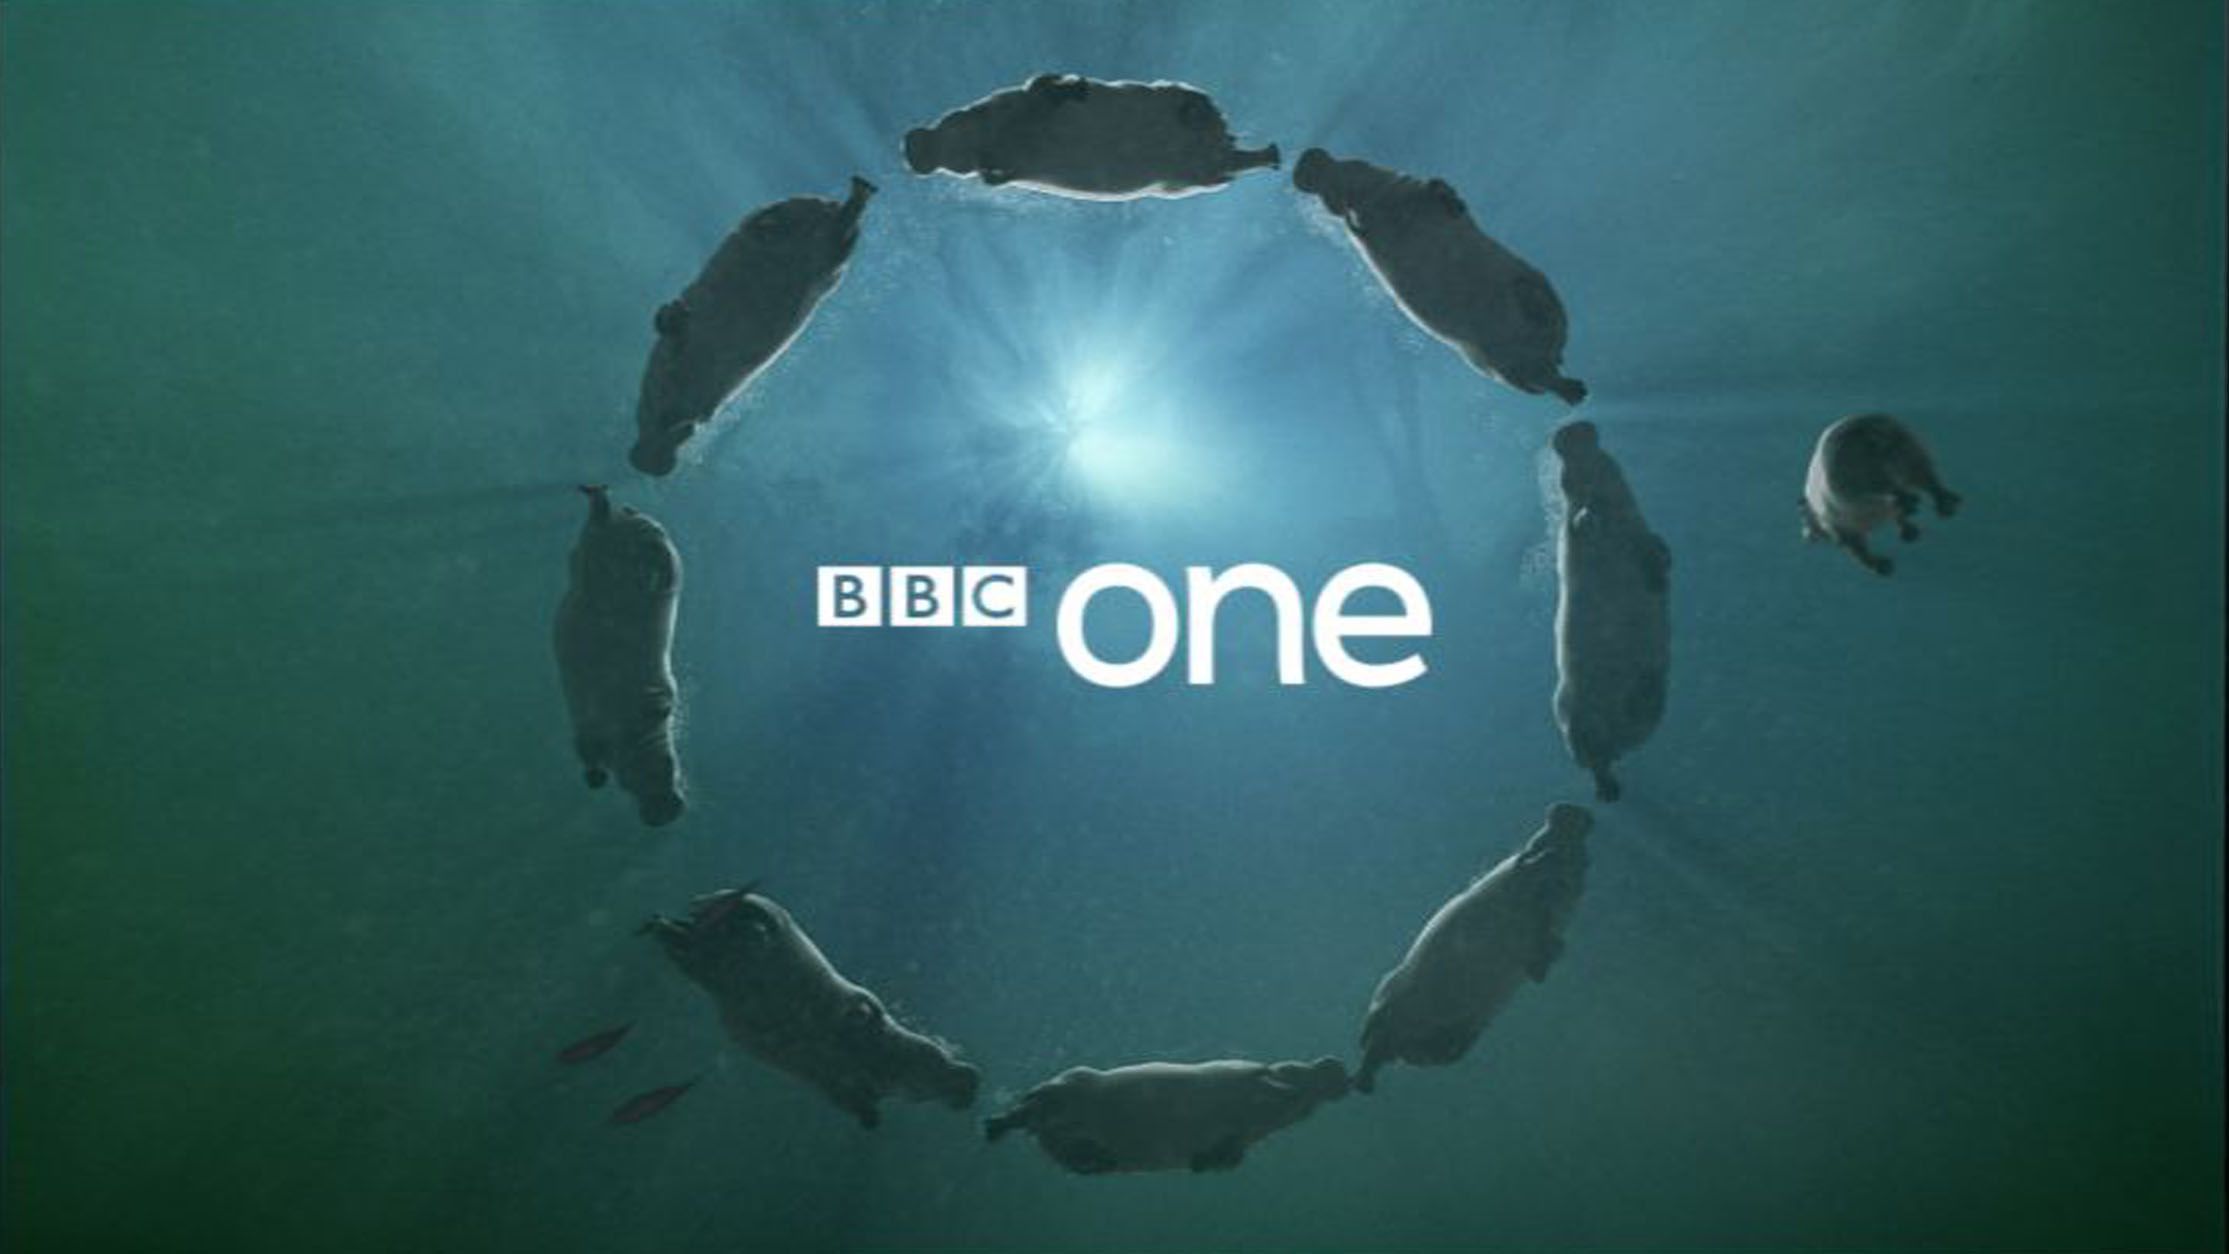 bbc one 1 coming to a tv near you well in the uk  image 1